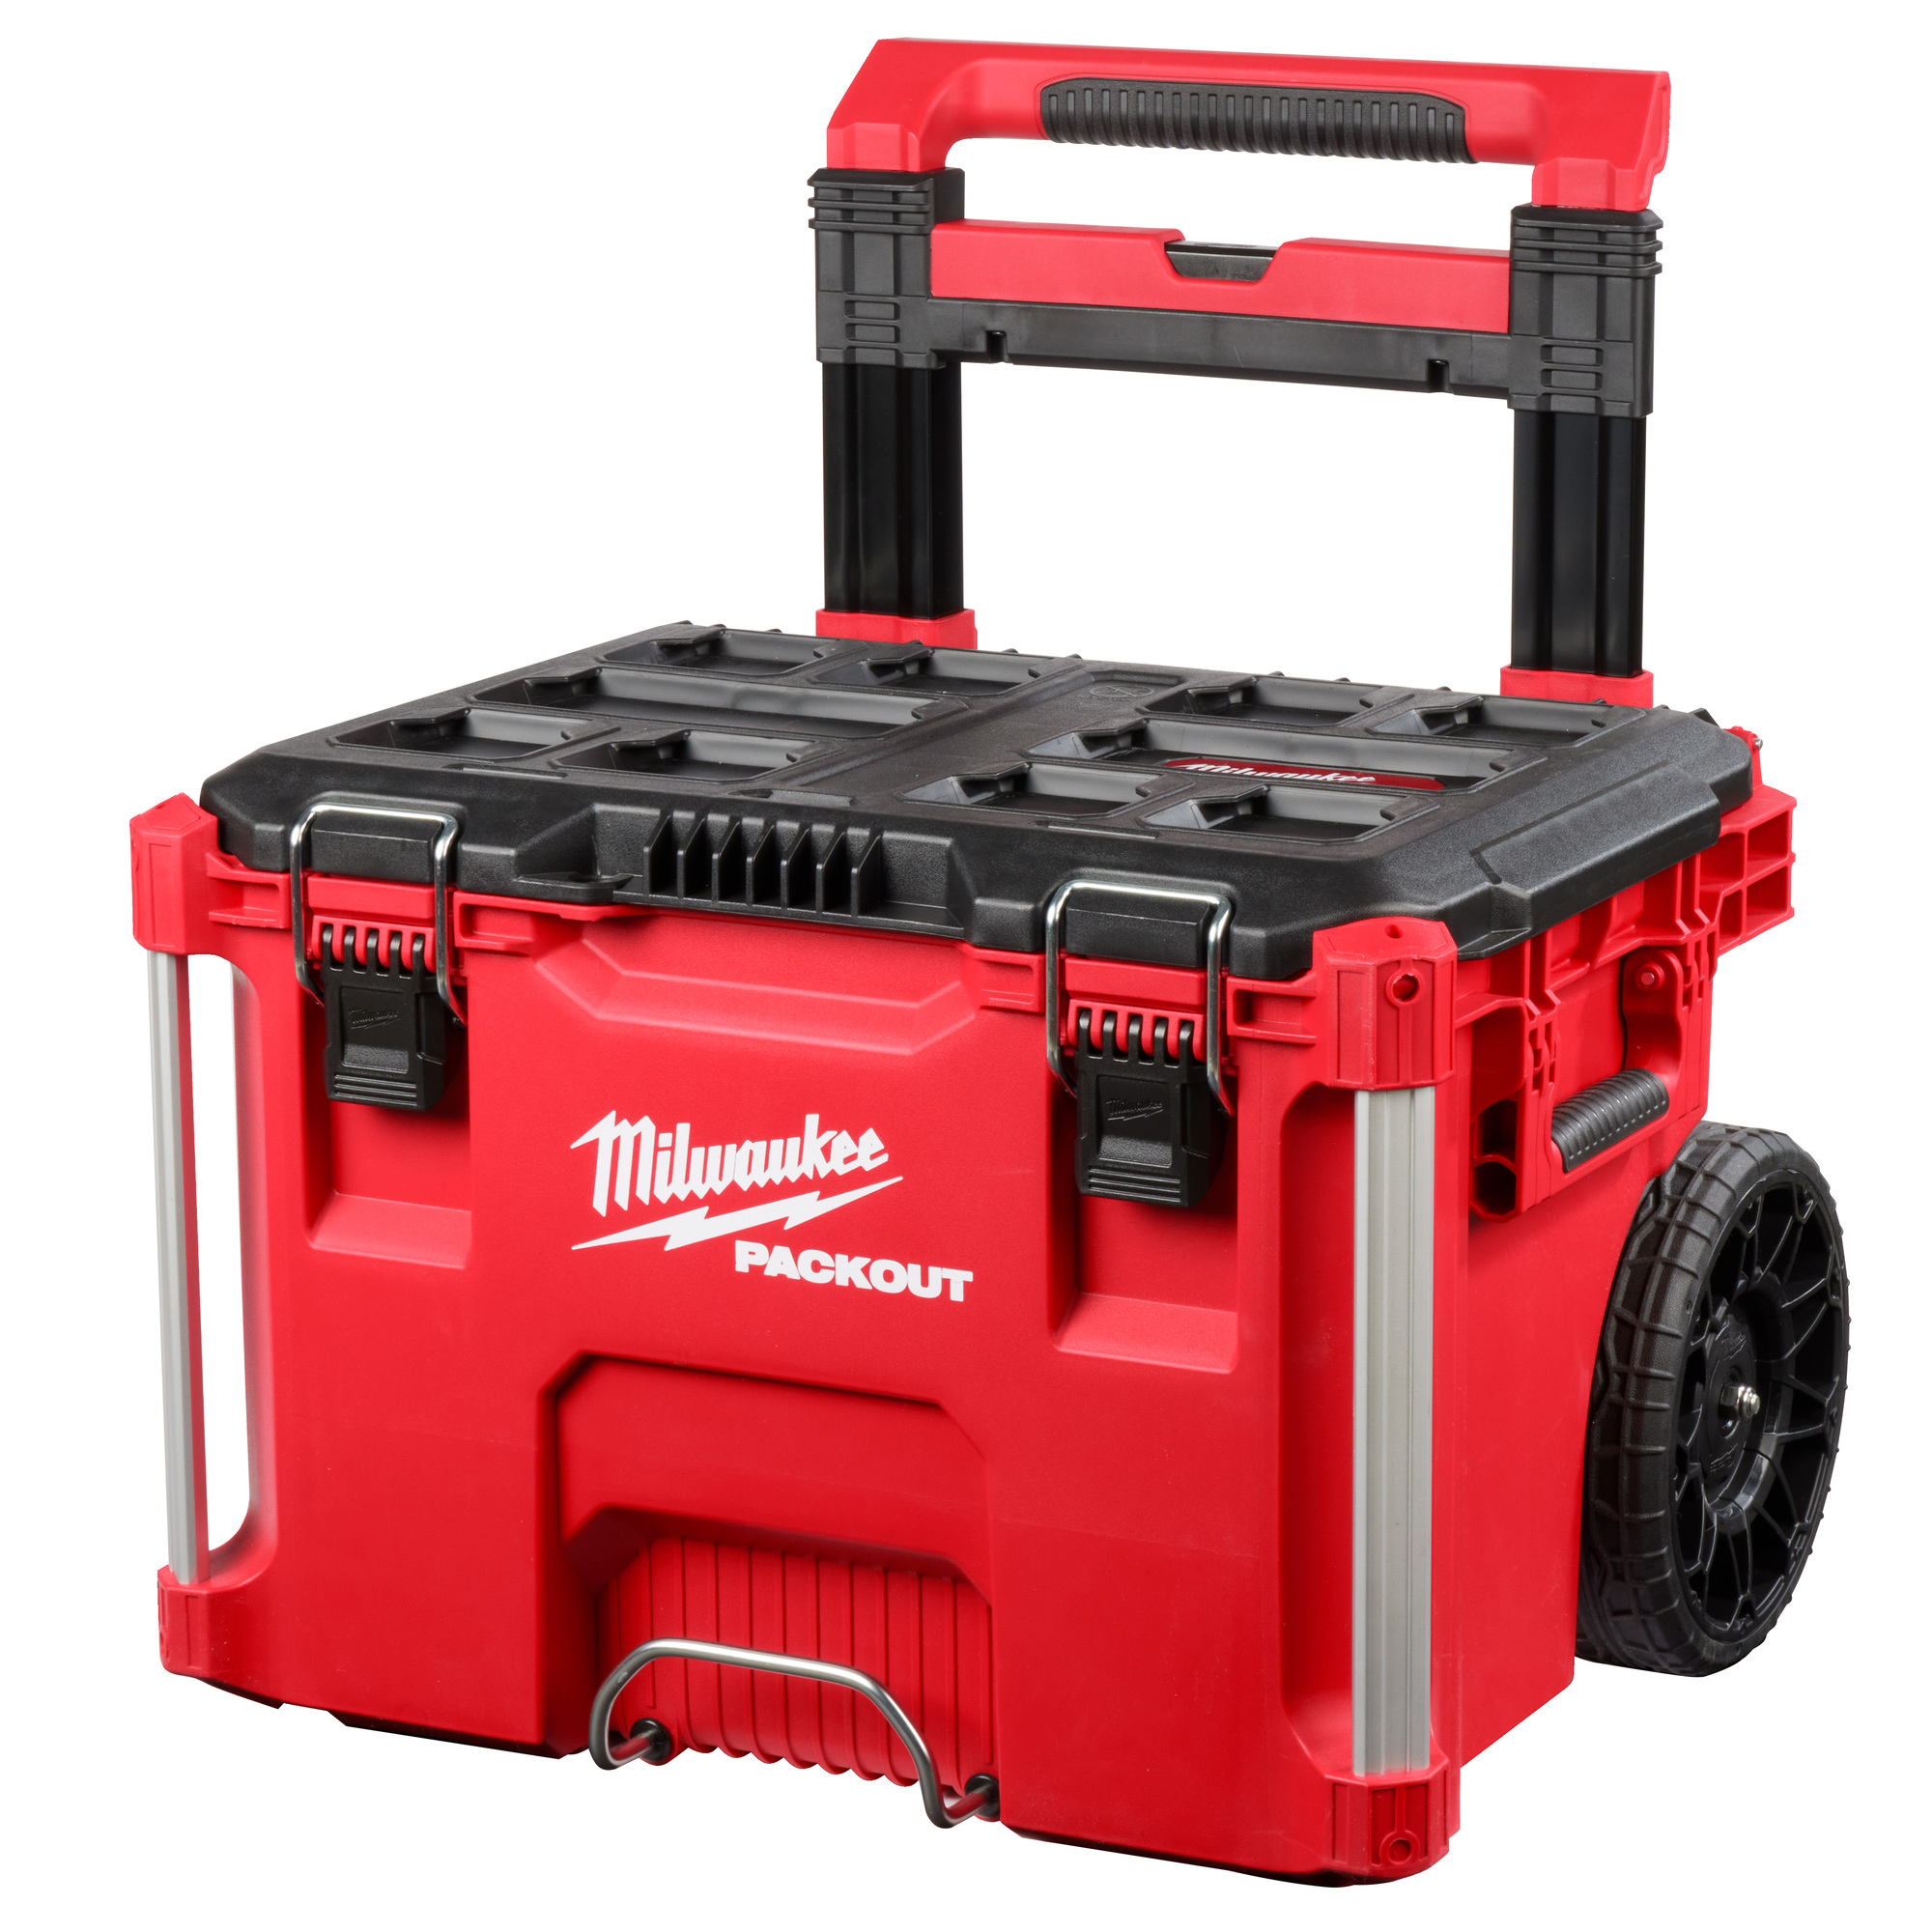 Milwaukee Packout Rolling Toolbox, 22.1in.L x 18.9in.W x 25.6in.H, Model#  48-22-8426